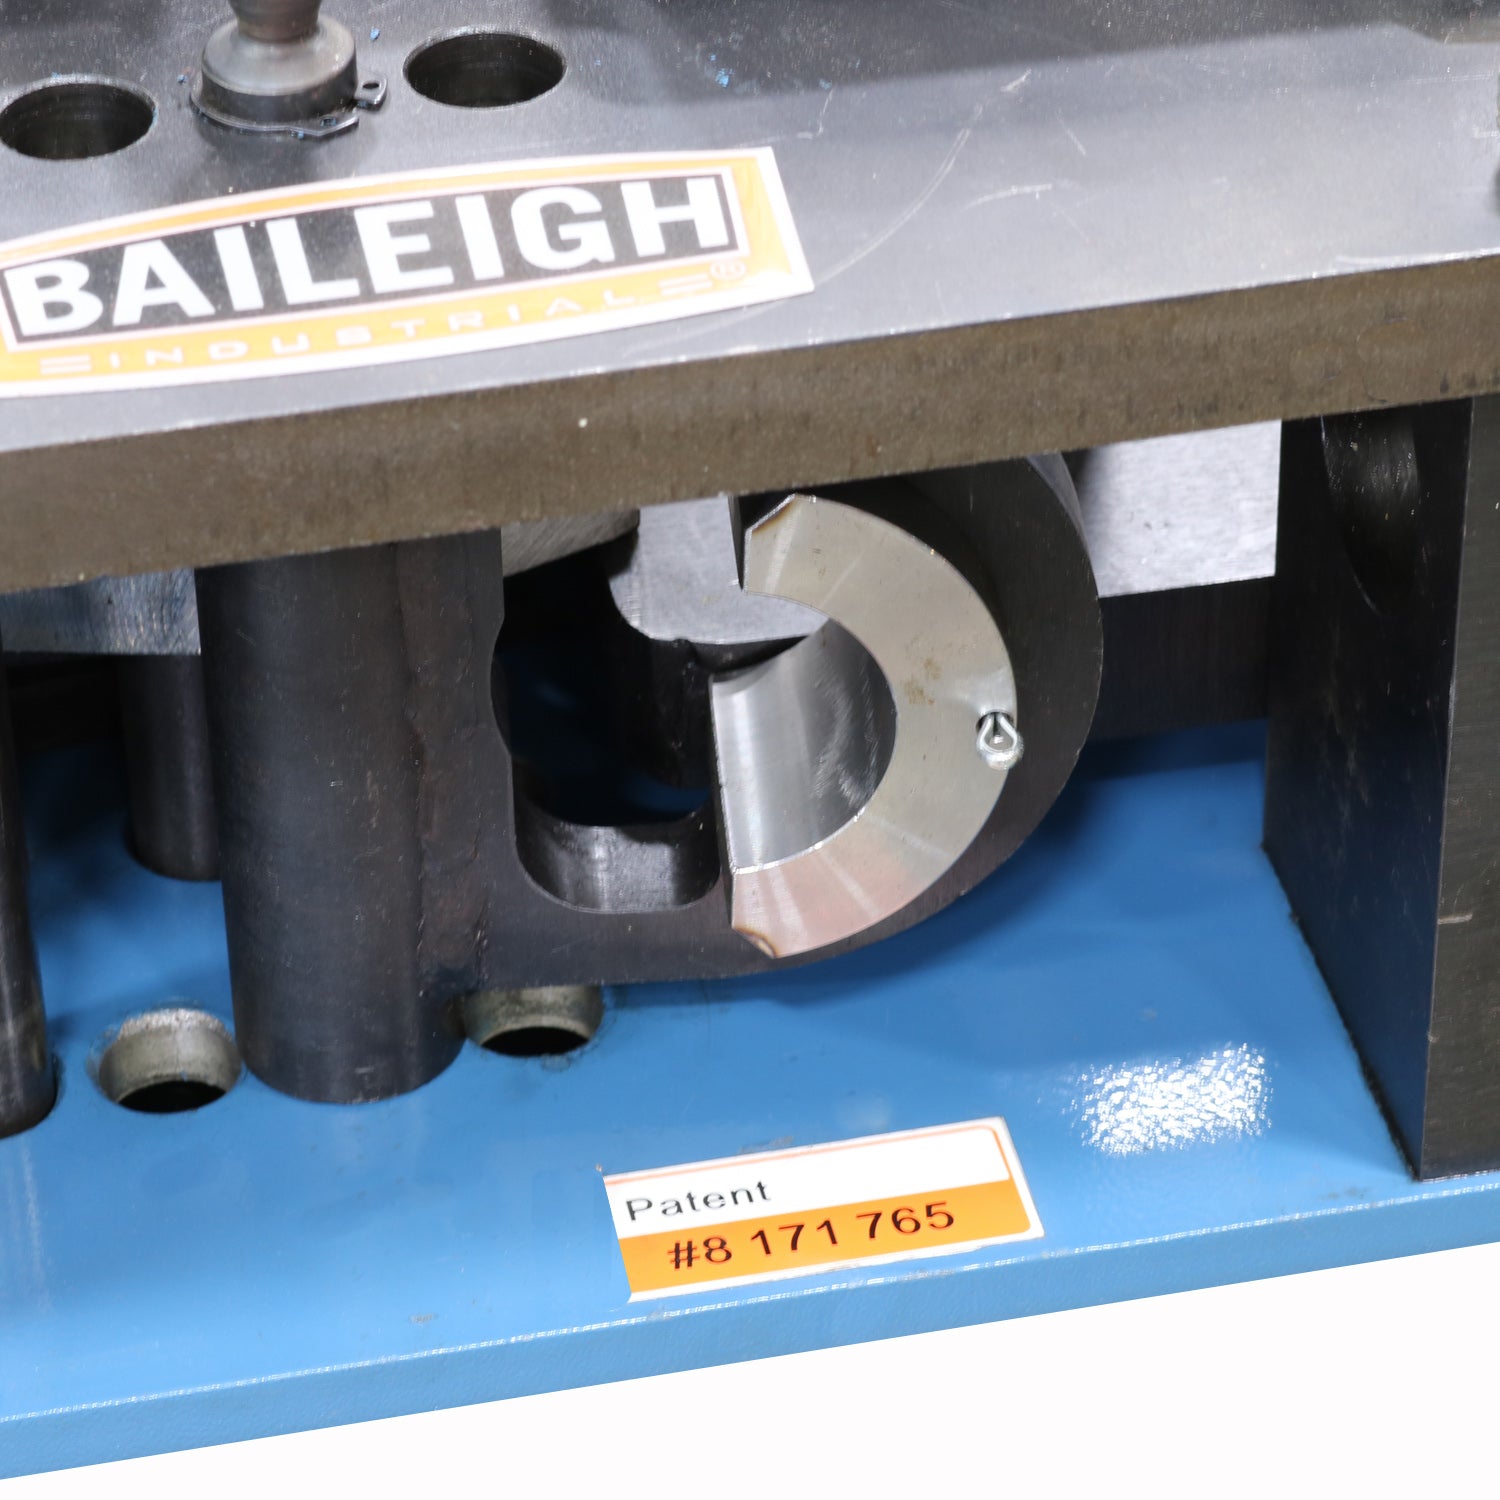 Baileigh RDB-050 Manually Operated Tube and Pipe Bender, 2-1/2" Tube Capacity, Includes Stand, Handle